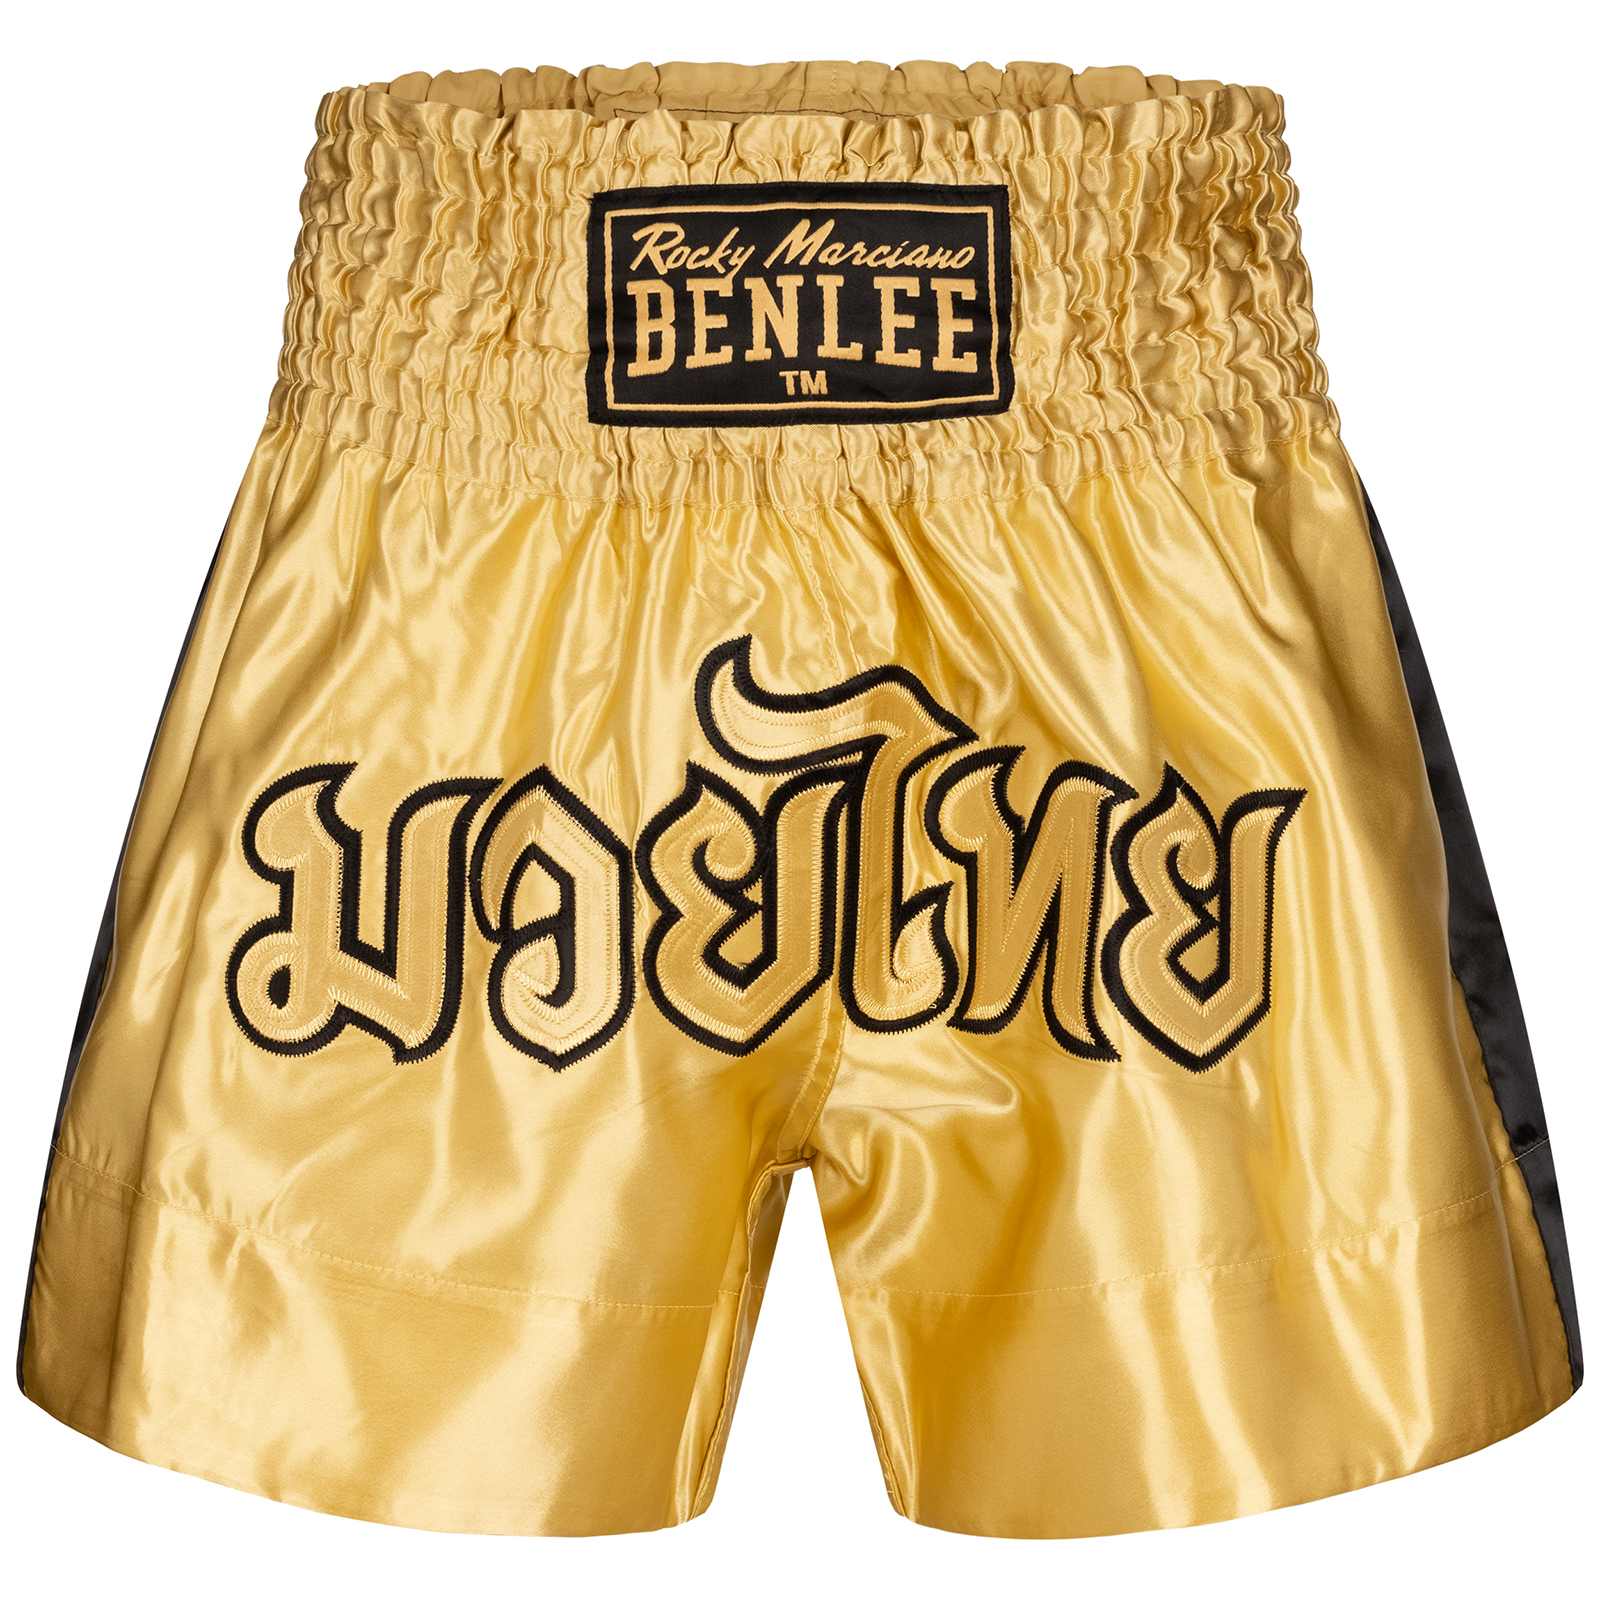 Boxing shorts Benlee Goldy